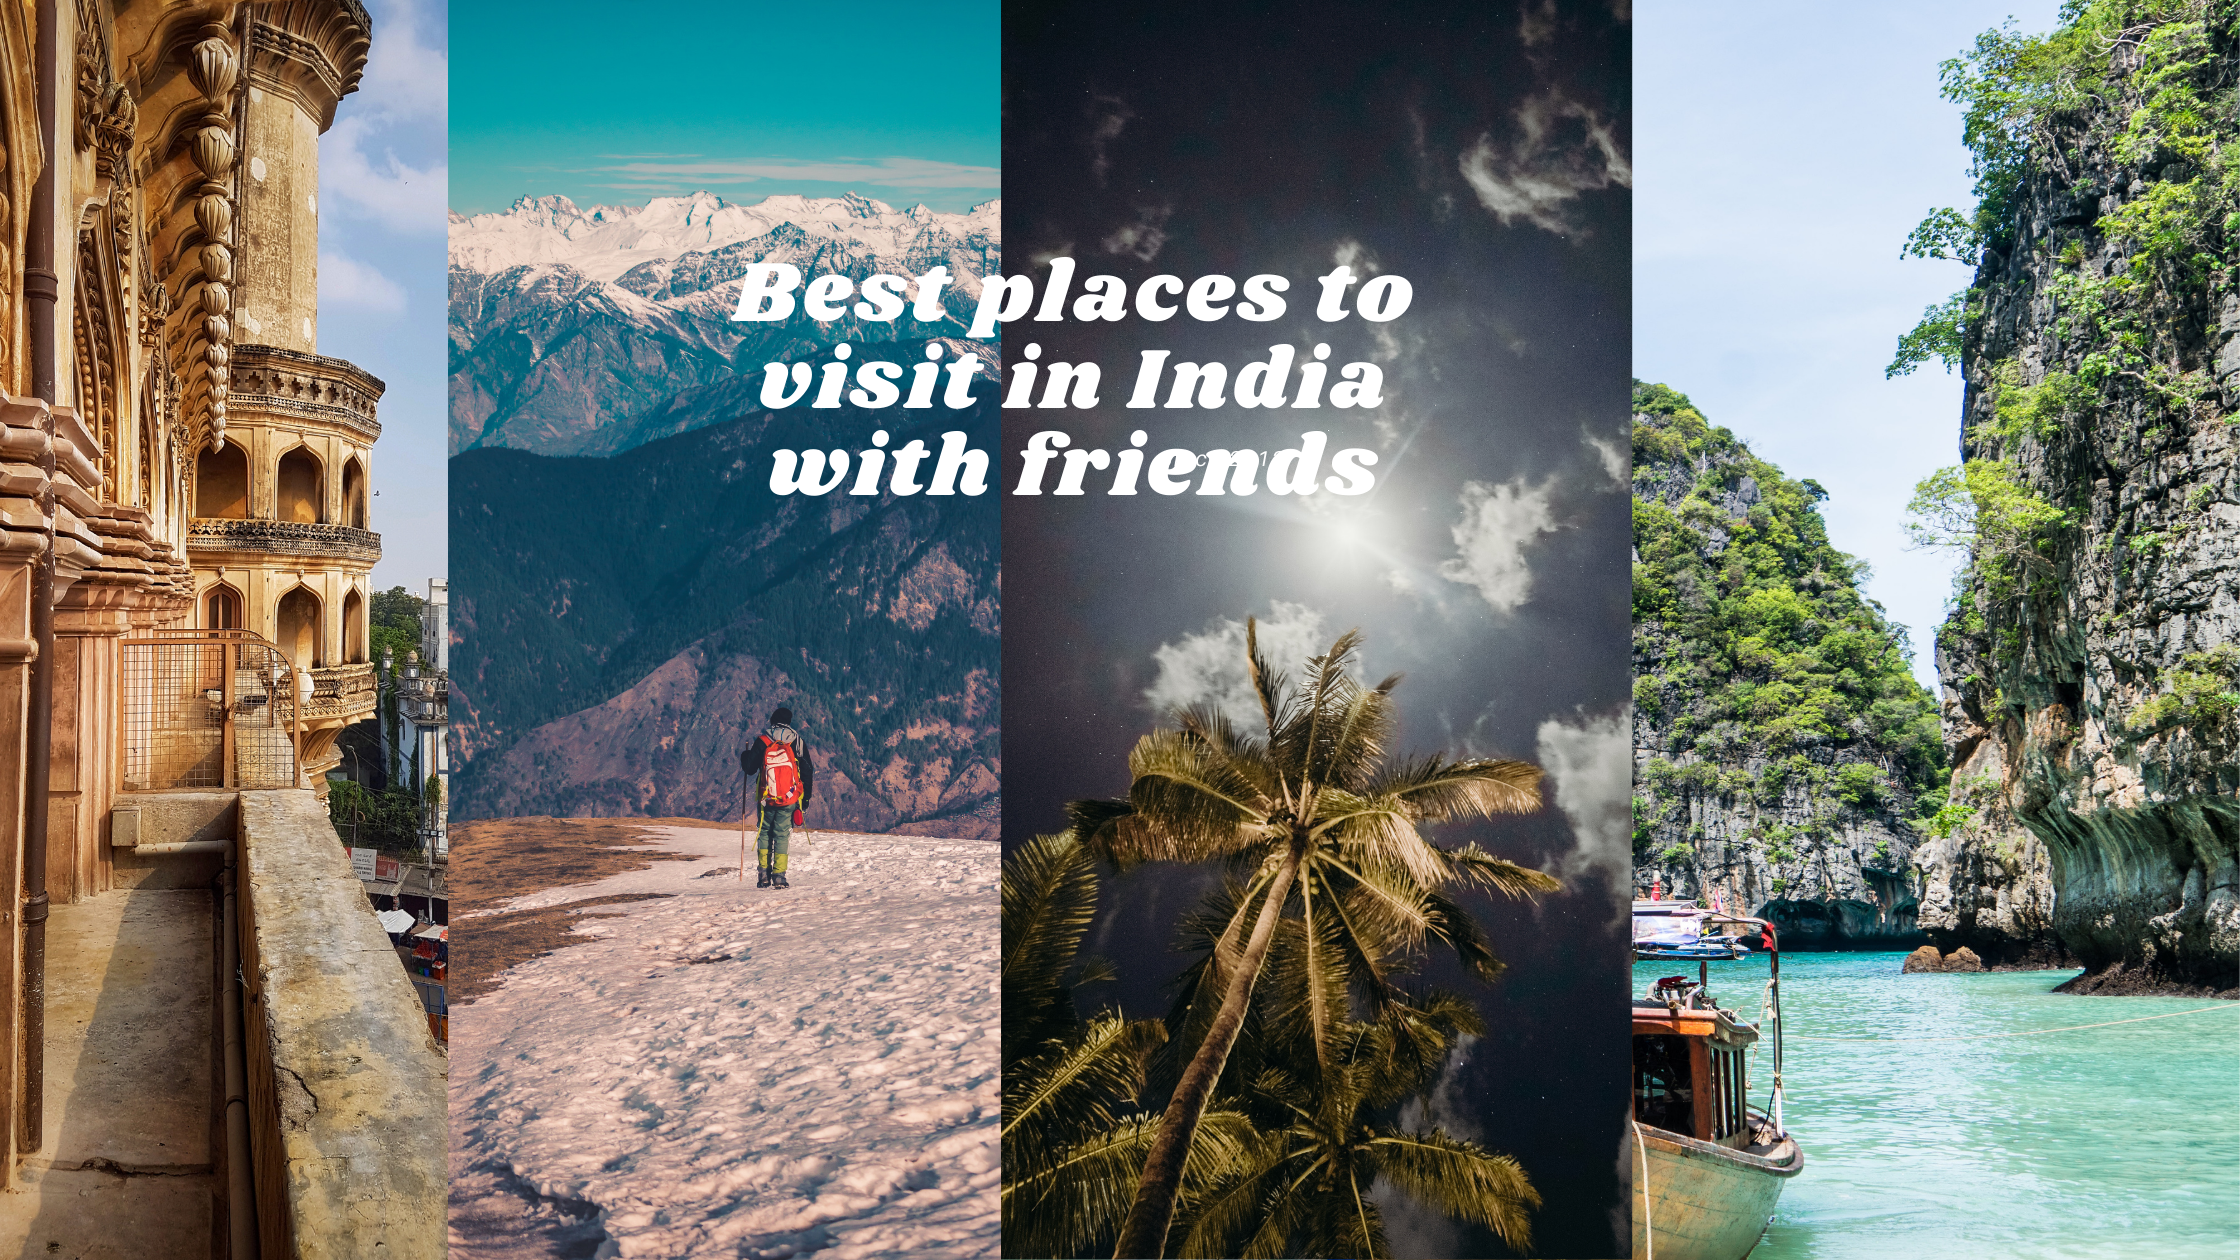 Best places to visit in India with friends